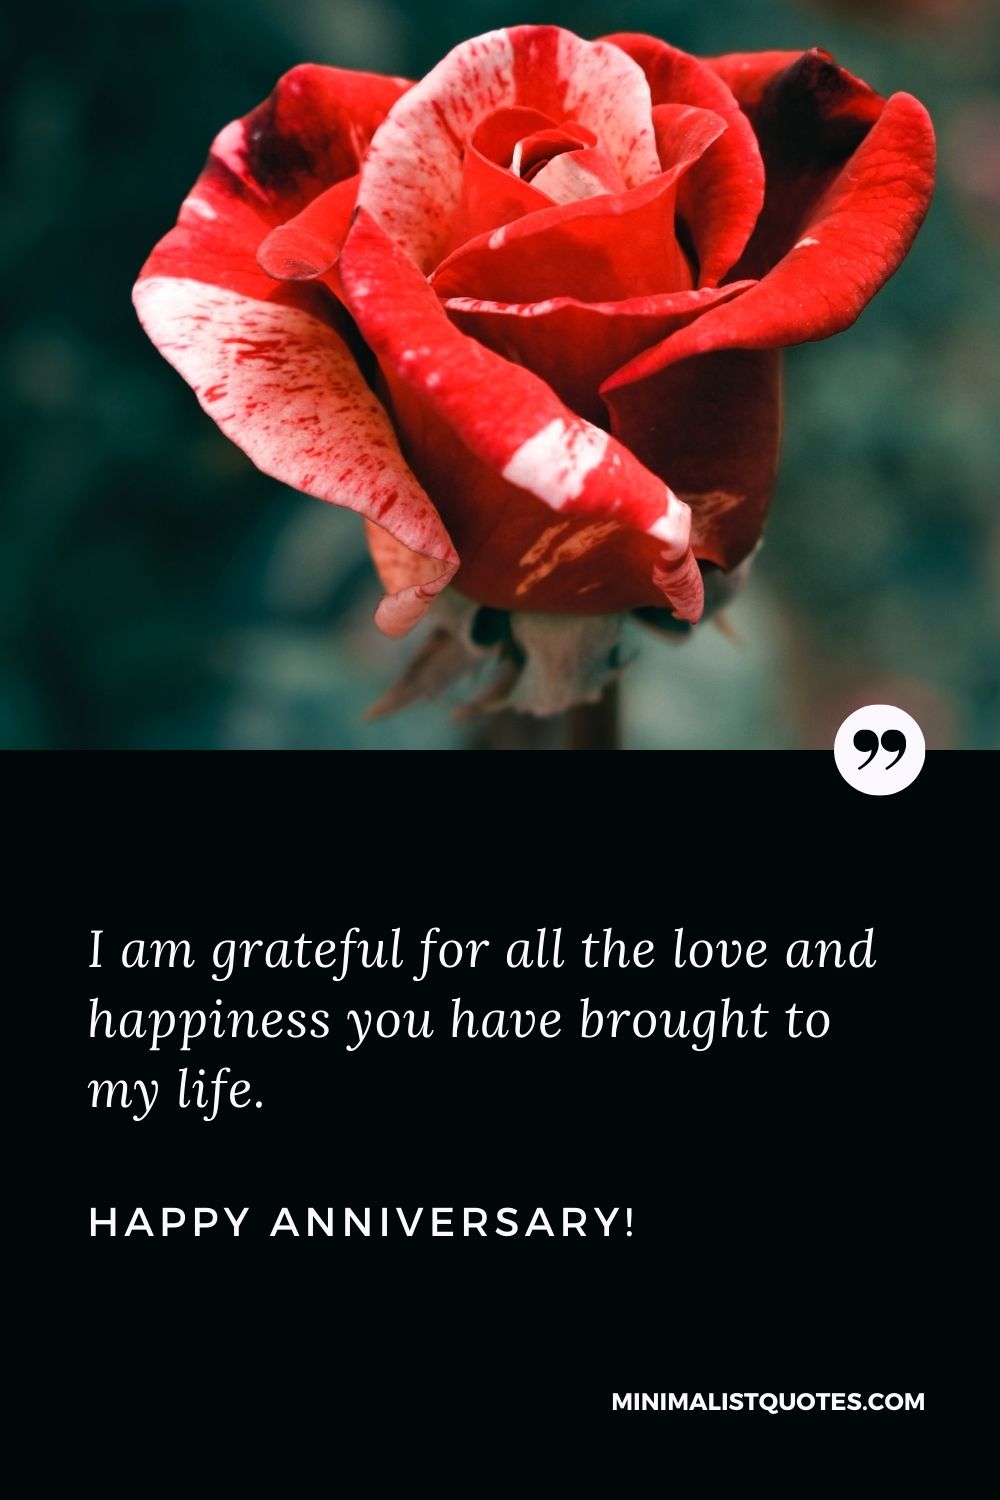 Happy wedding anniversary wishes: I am grateful for all the love and happiness you have brought to my life. Happy Anniversary!